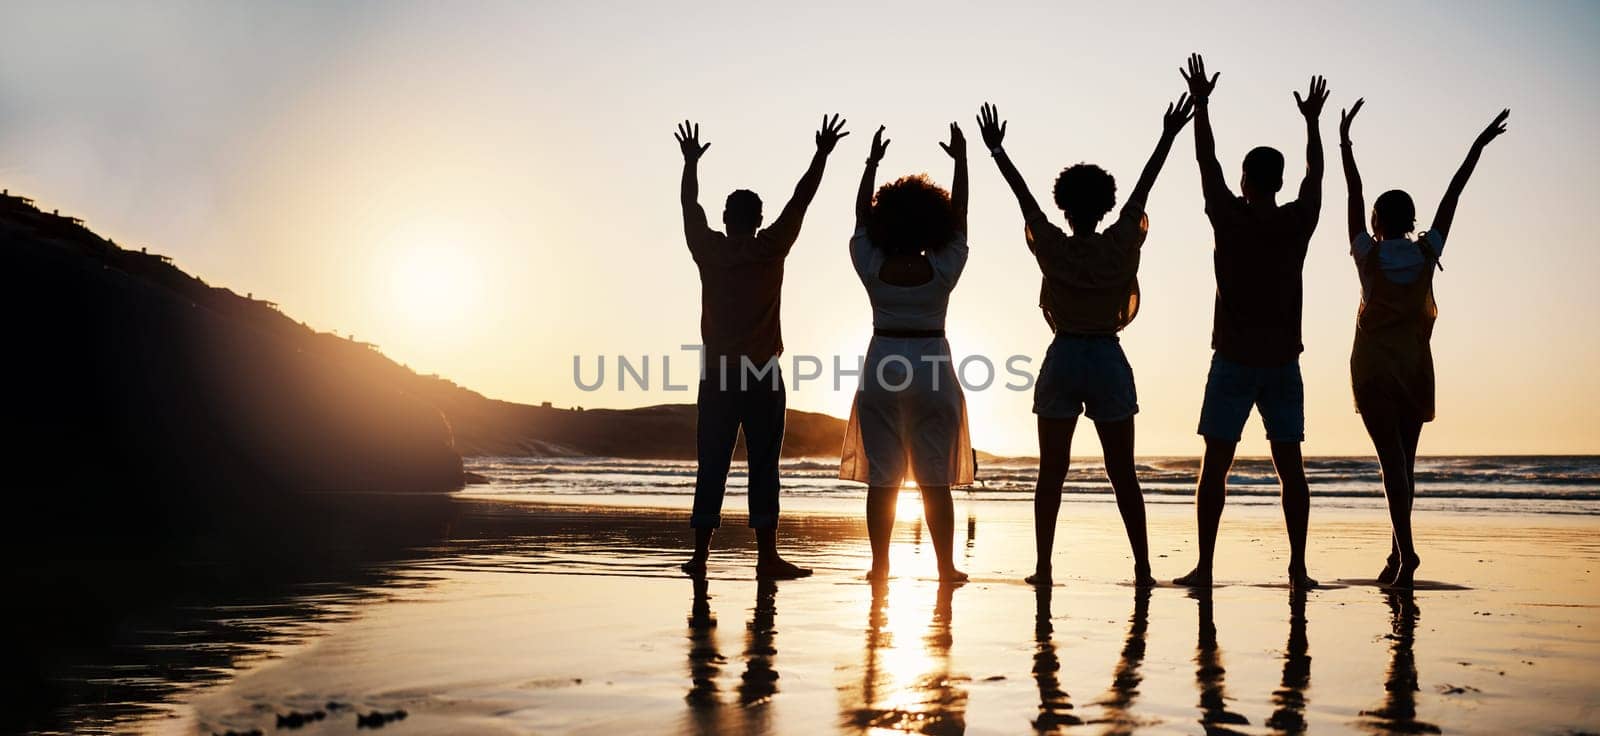 Beach, celebration and back of friends at sunset with arms up for freedom, fun and travel success. Ocean, silhouette and rear view of people celebrating journey, adventure and summer vacation in Bali.